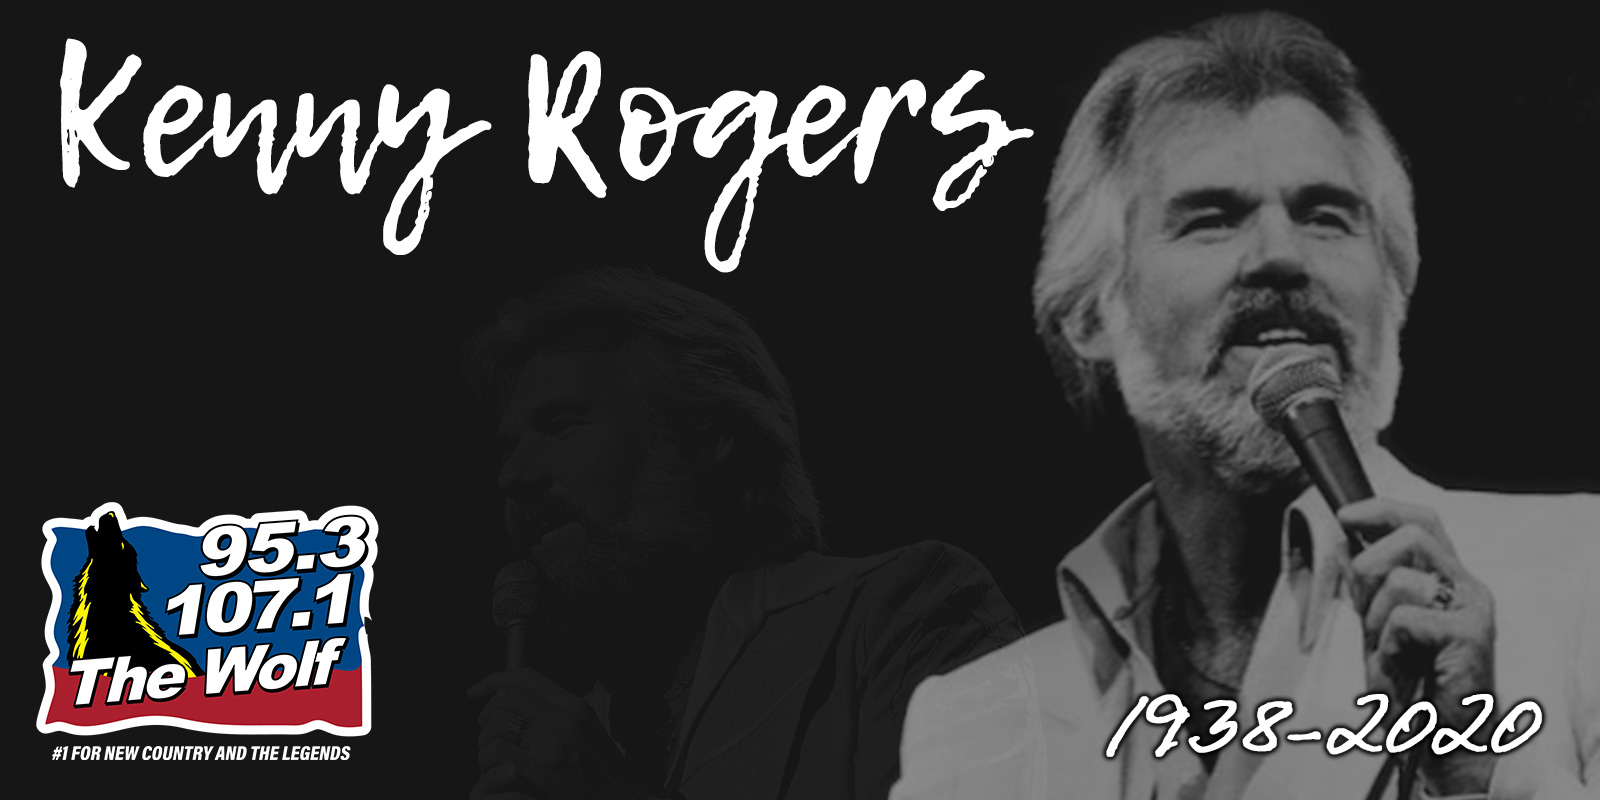 Crossover Country Superstar Kenny Rogers Dies at 81